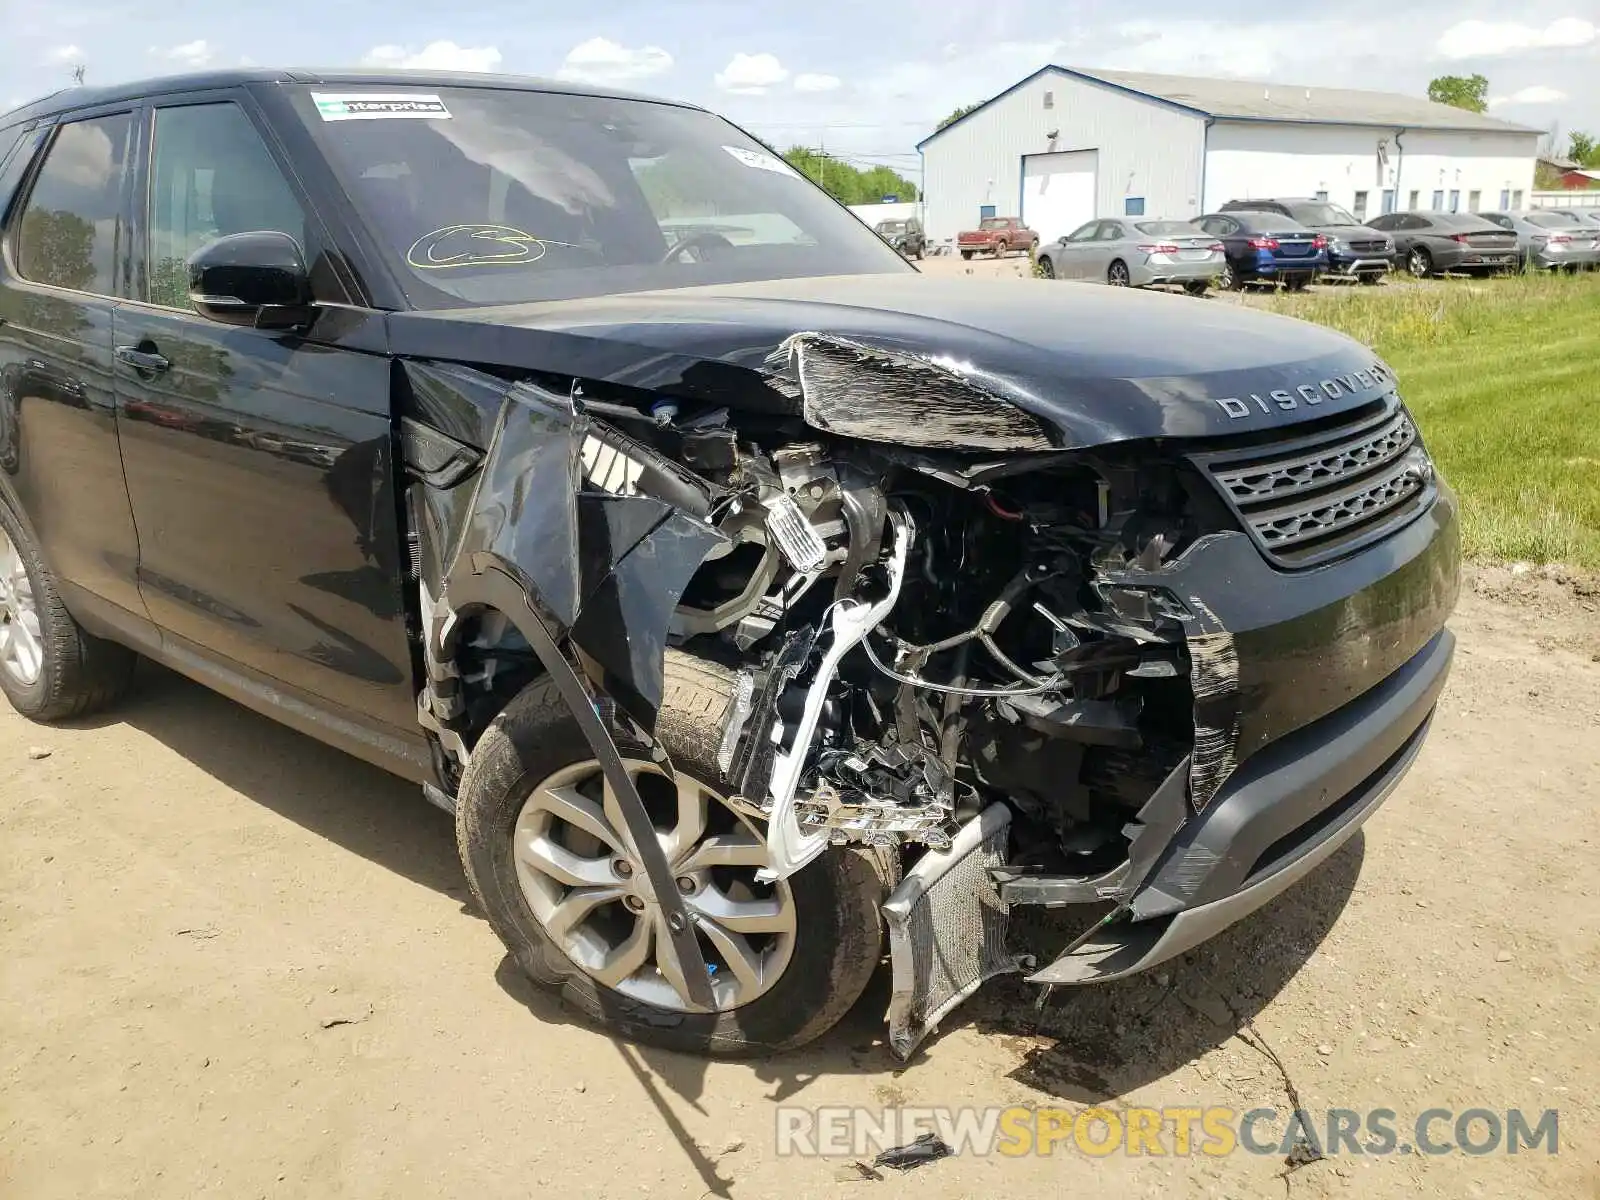 9 Photograph of a damaged car SALRG2RV1L2428285 LAND ROVER DISCOVERY 2020